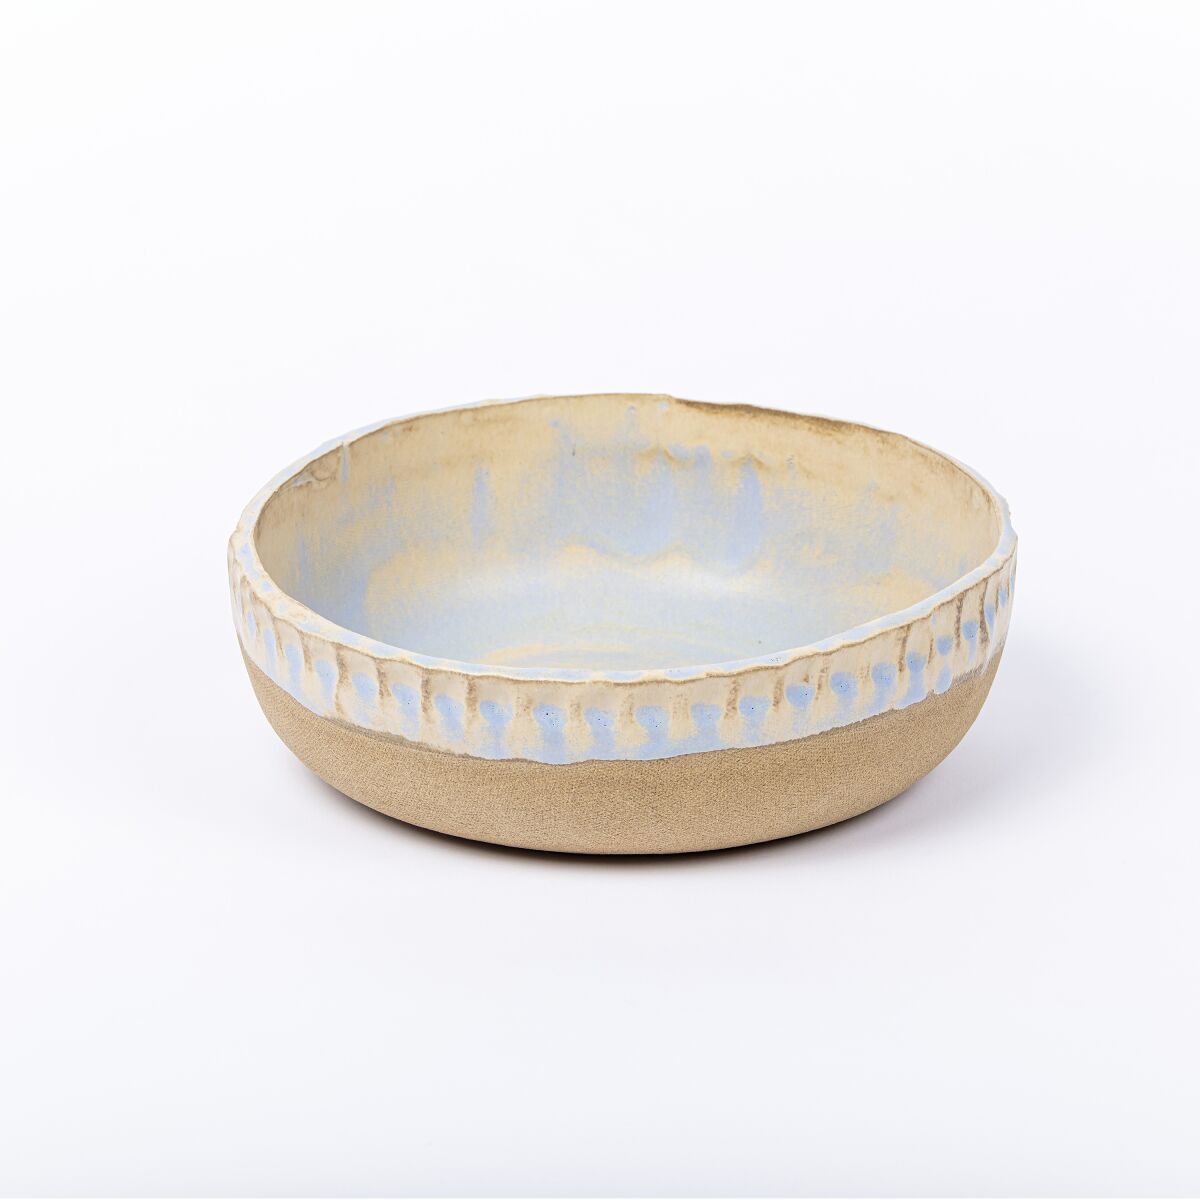 An earth-colored ceramic bowl with a blue-ish glaze is shown against a white background